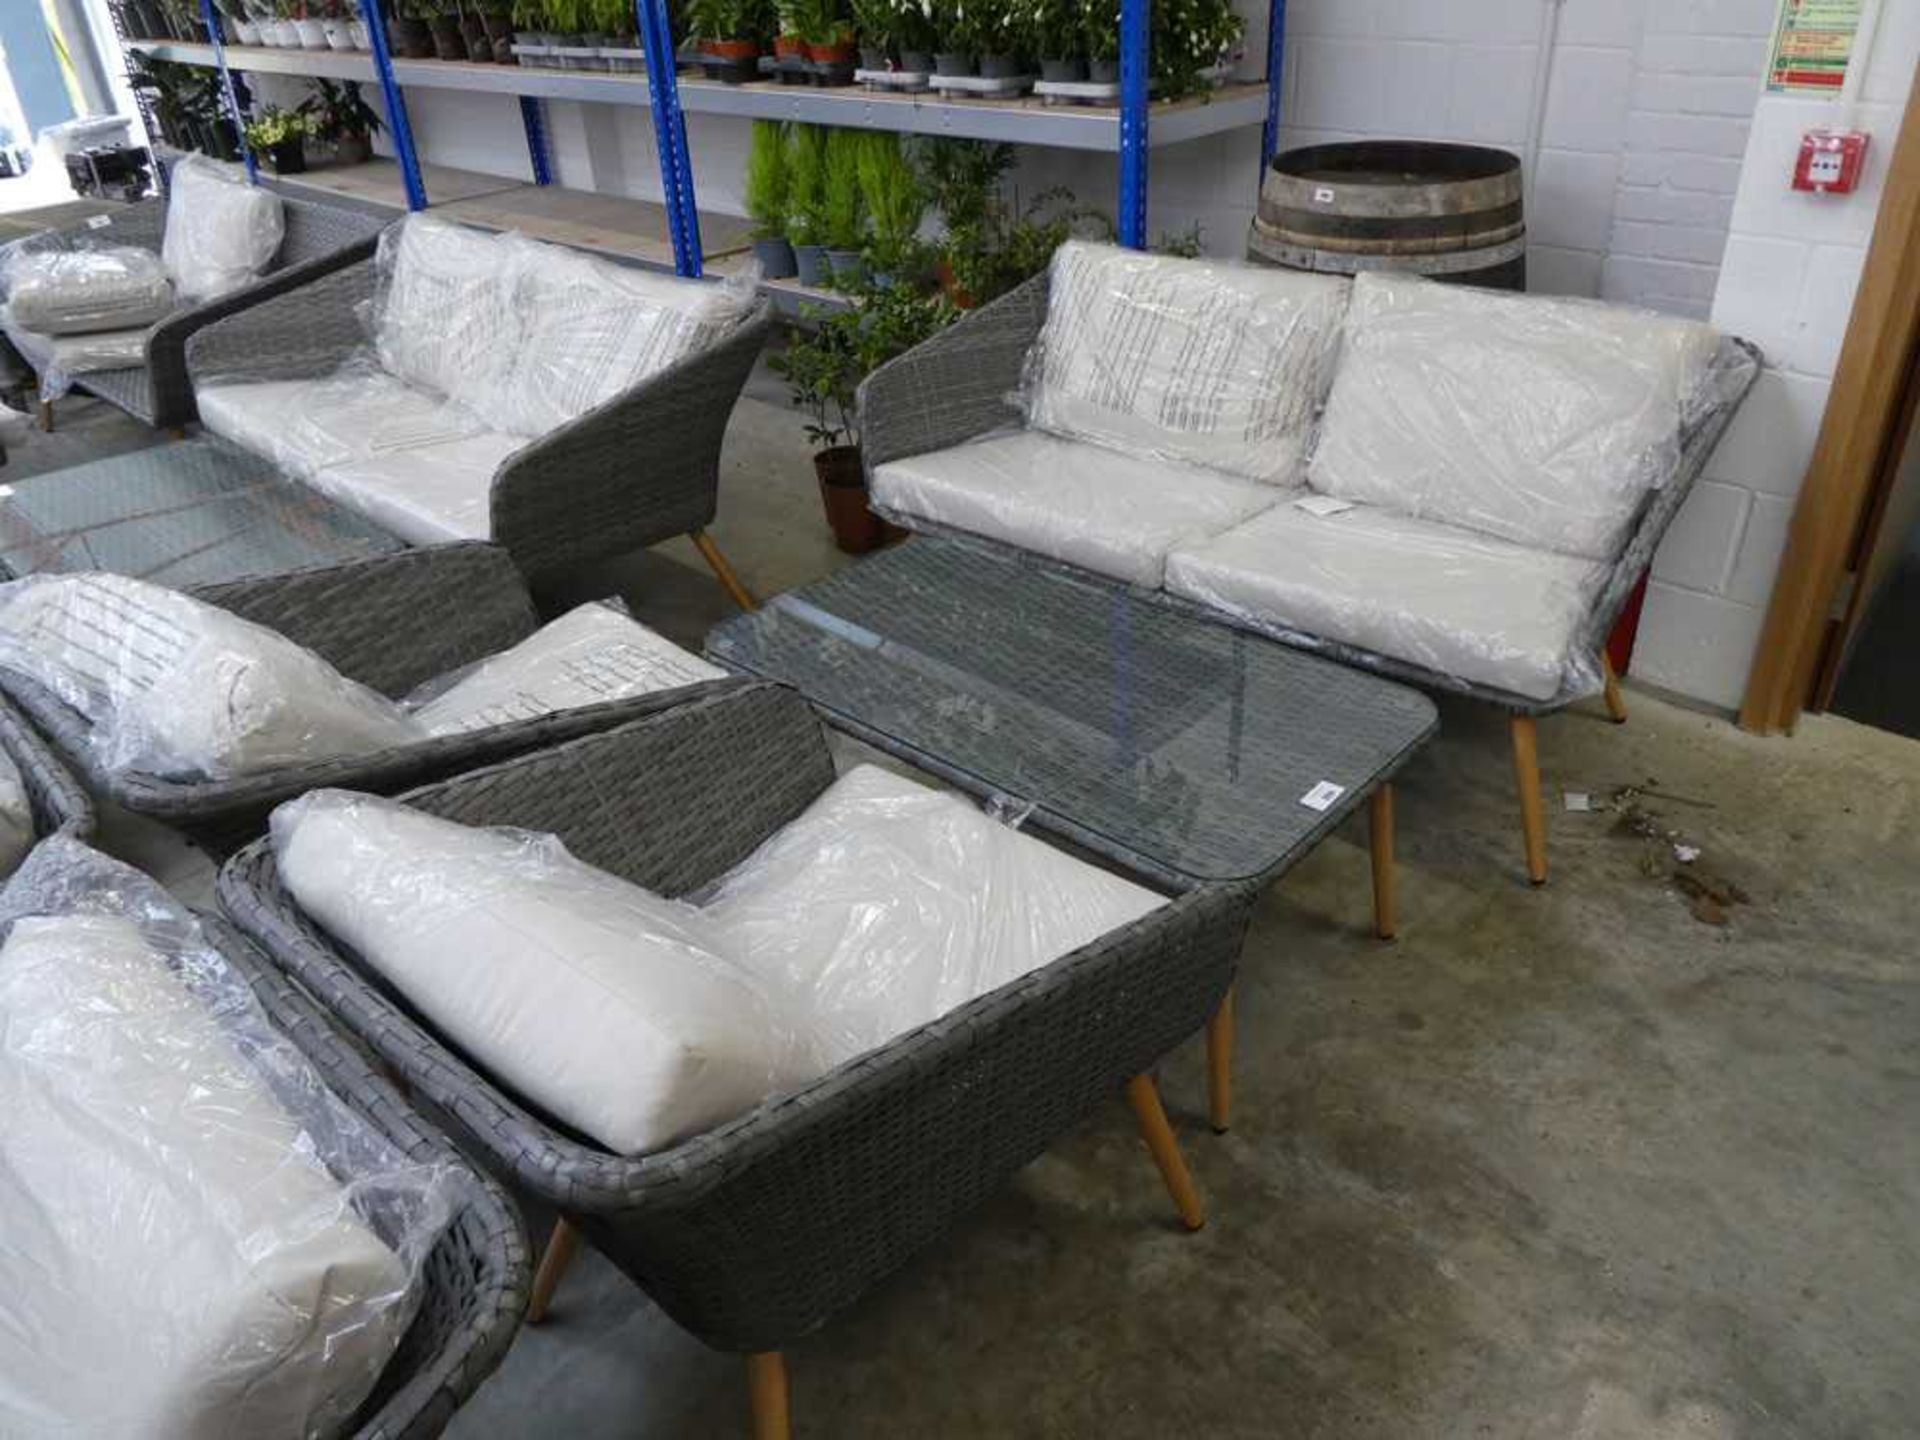 +VAT Grey rattan 4 piece garden patio seating set comprising 2 seater sofa, 2 armchairs (each with